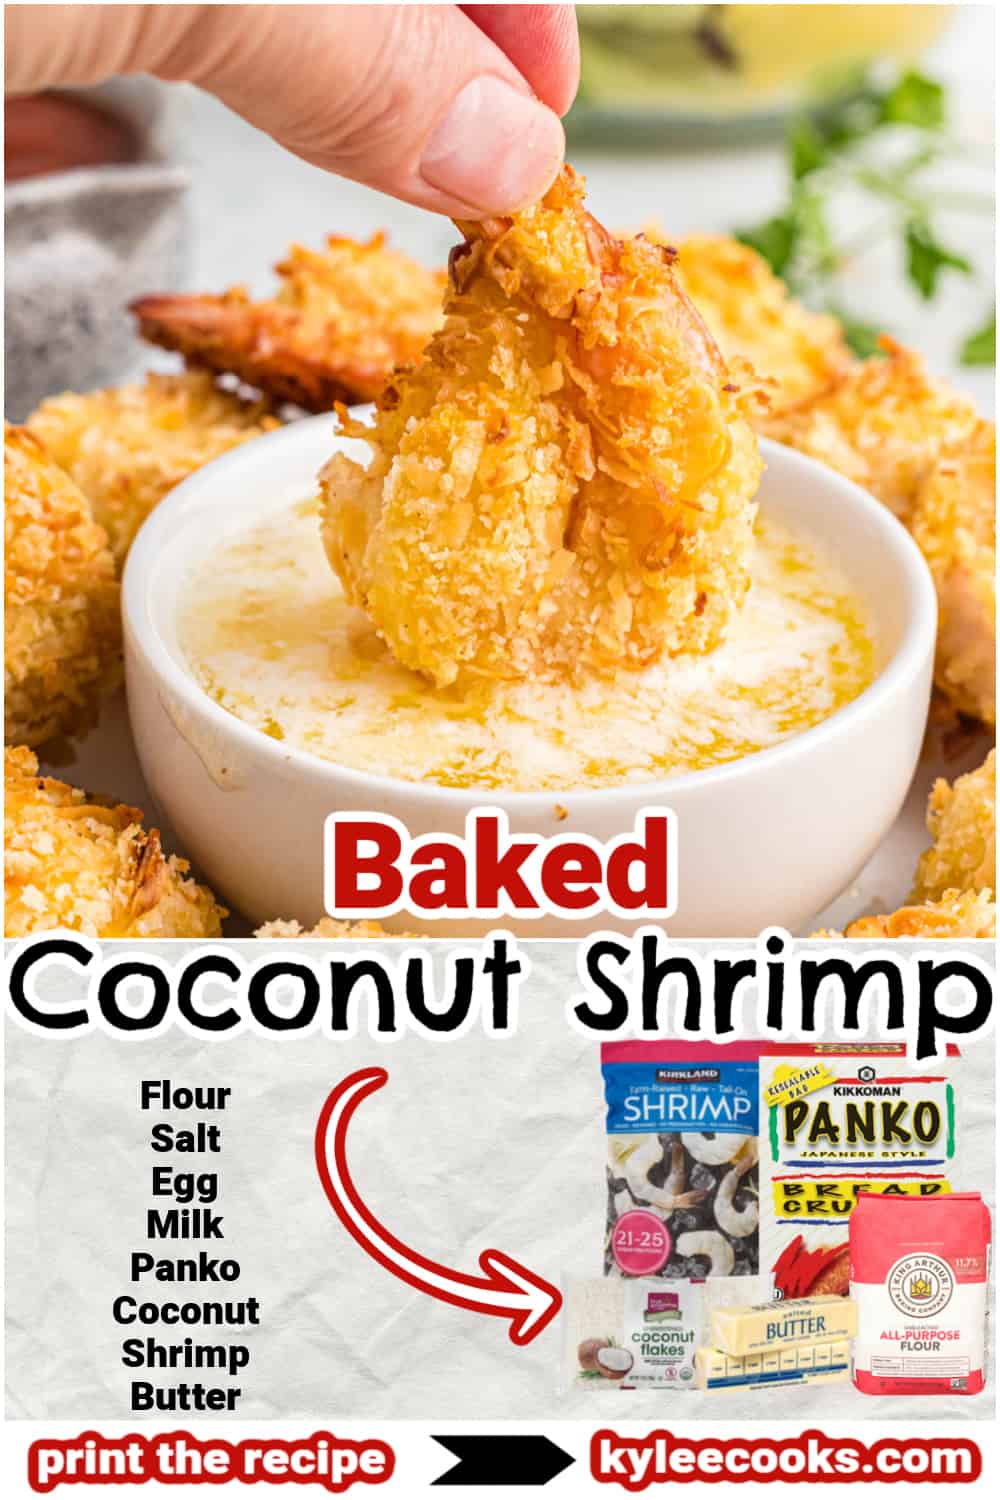 Collage of coconut shrimp with "baked coconut shrimp" overlaid in text.